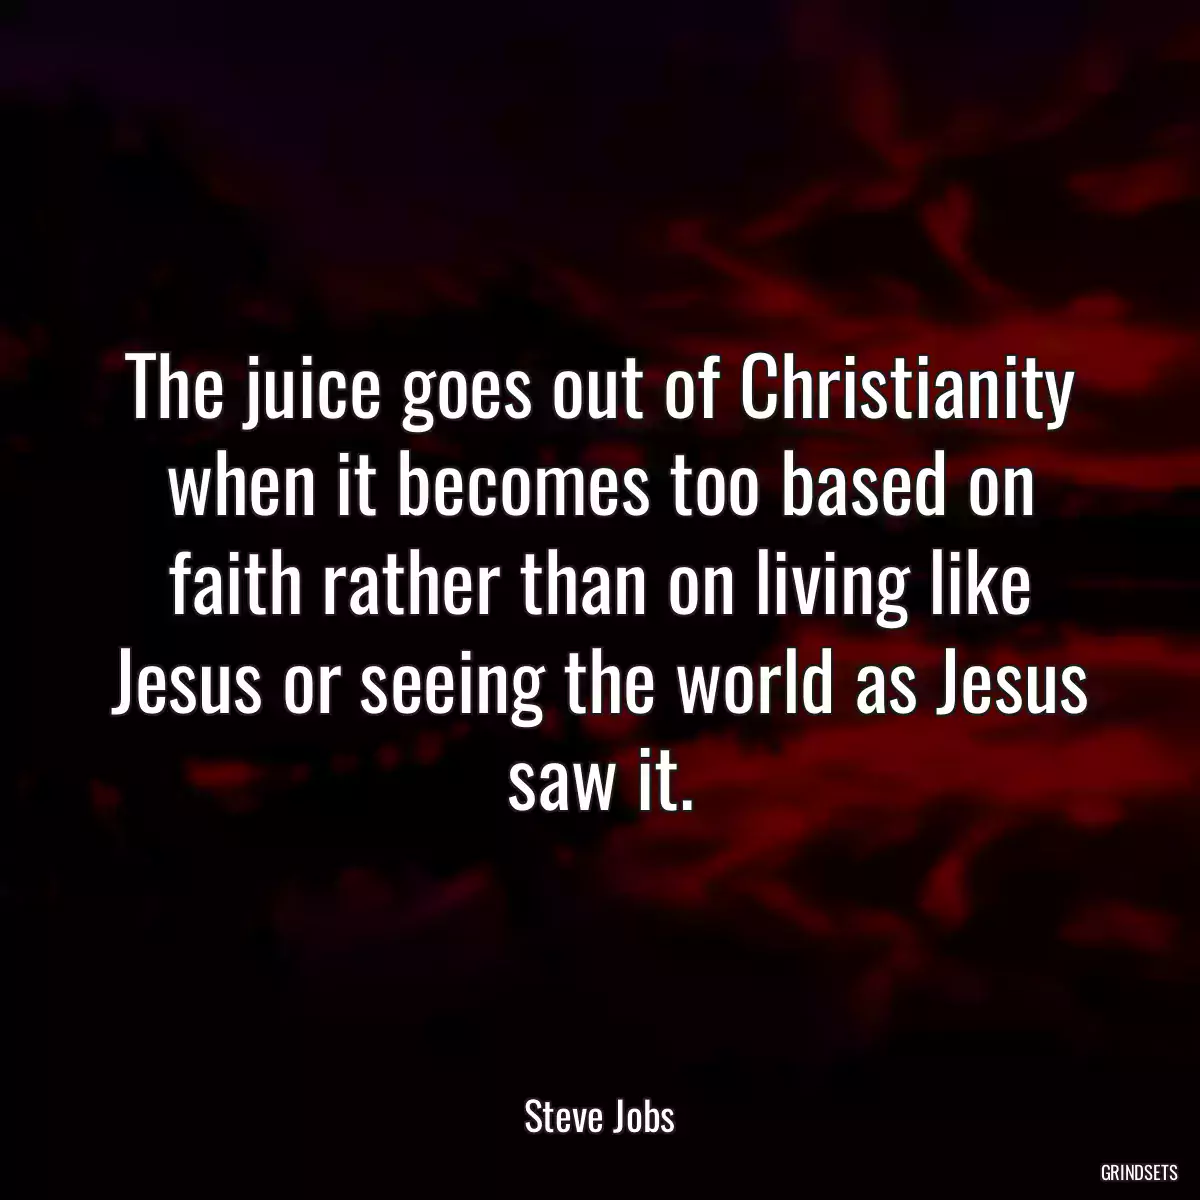 The juice goes out of Christianity when it becomes too based on faith rather than on living like Jesus or seeing the world as Jesus saw it.